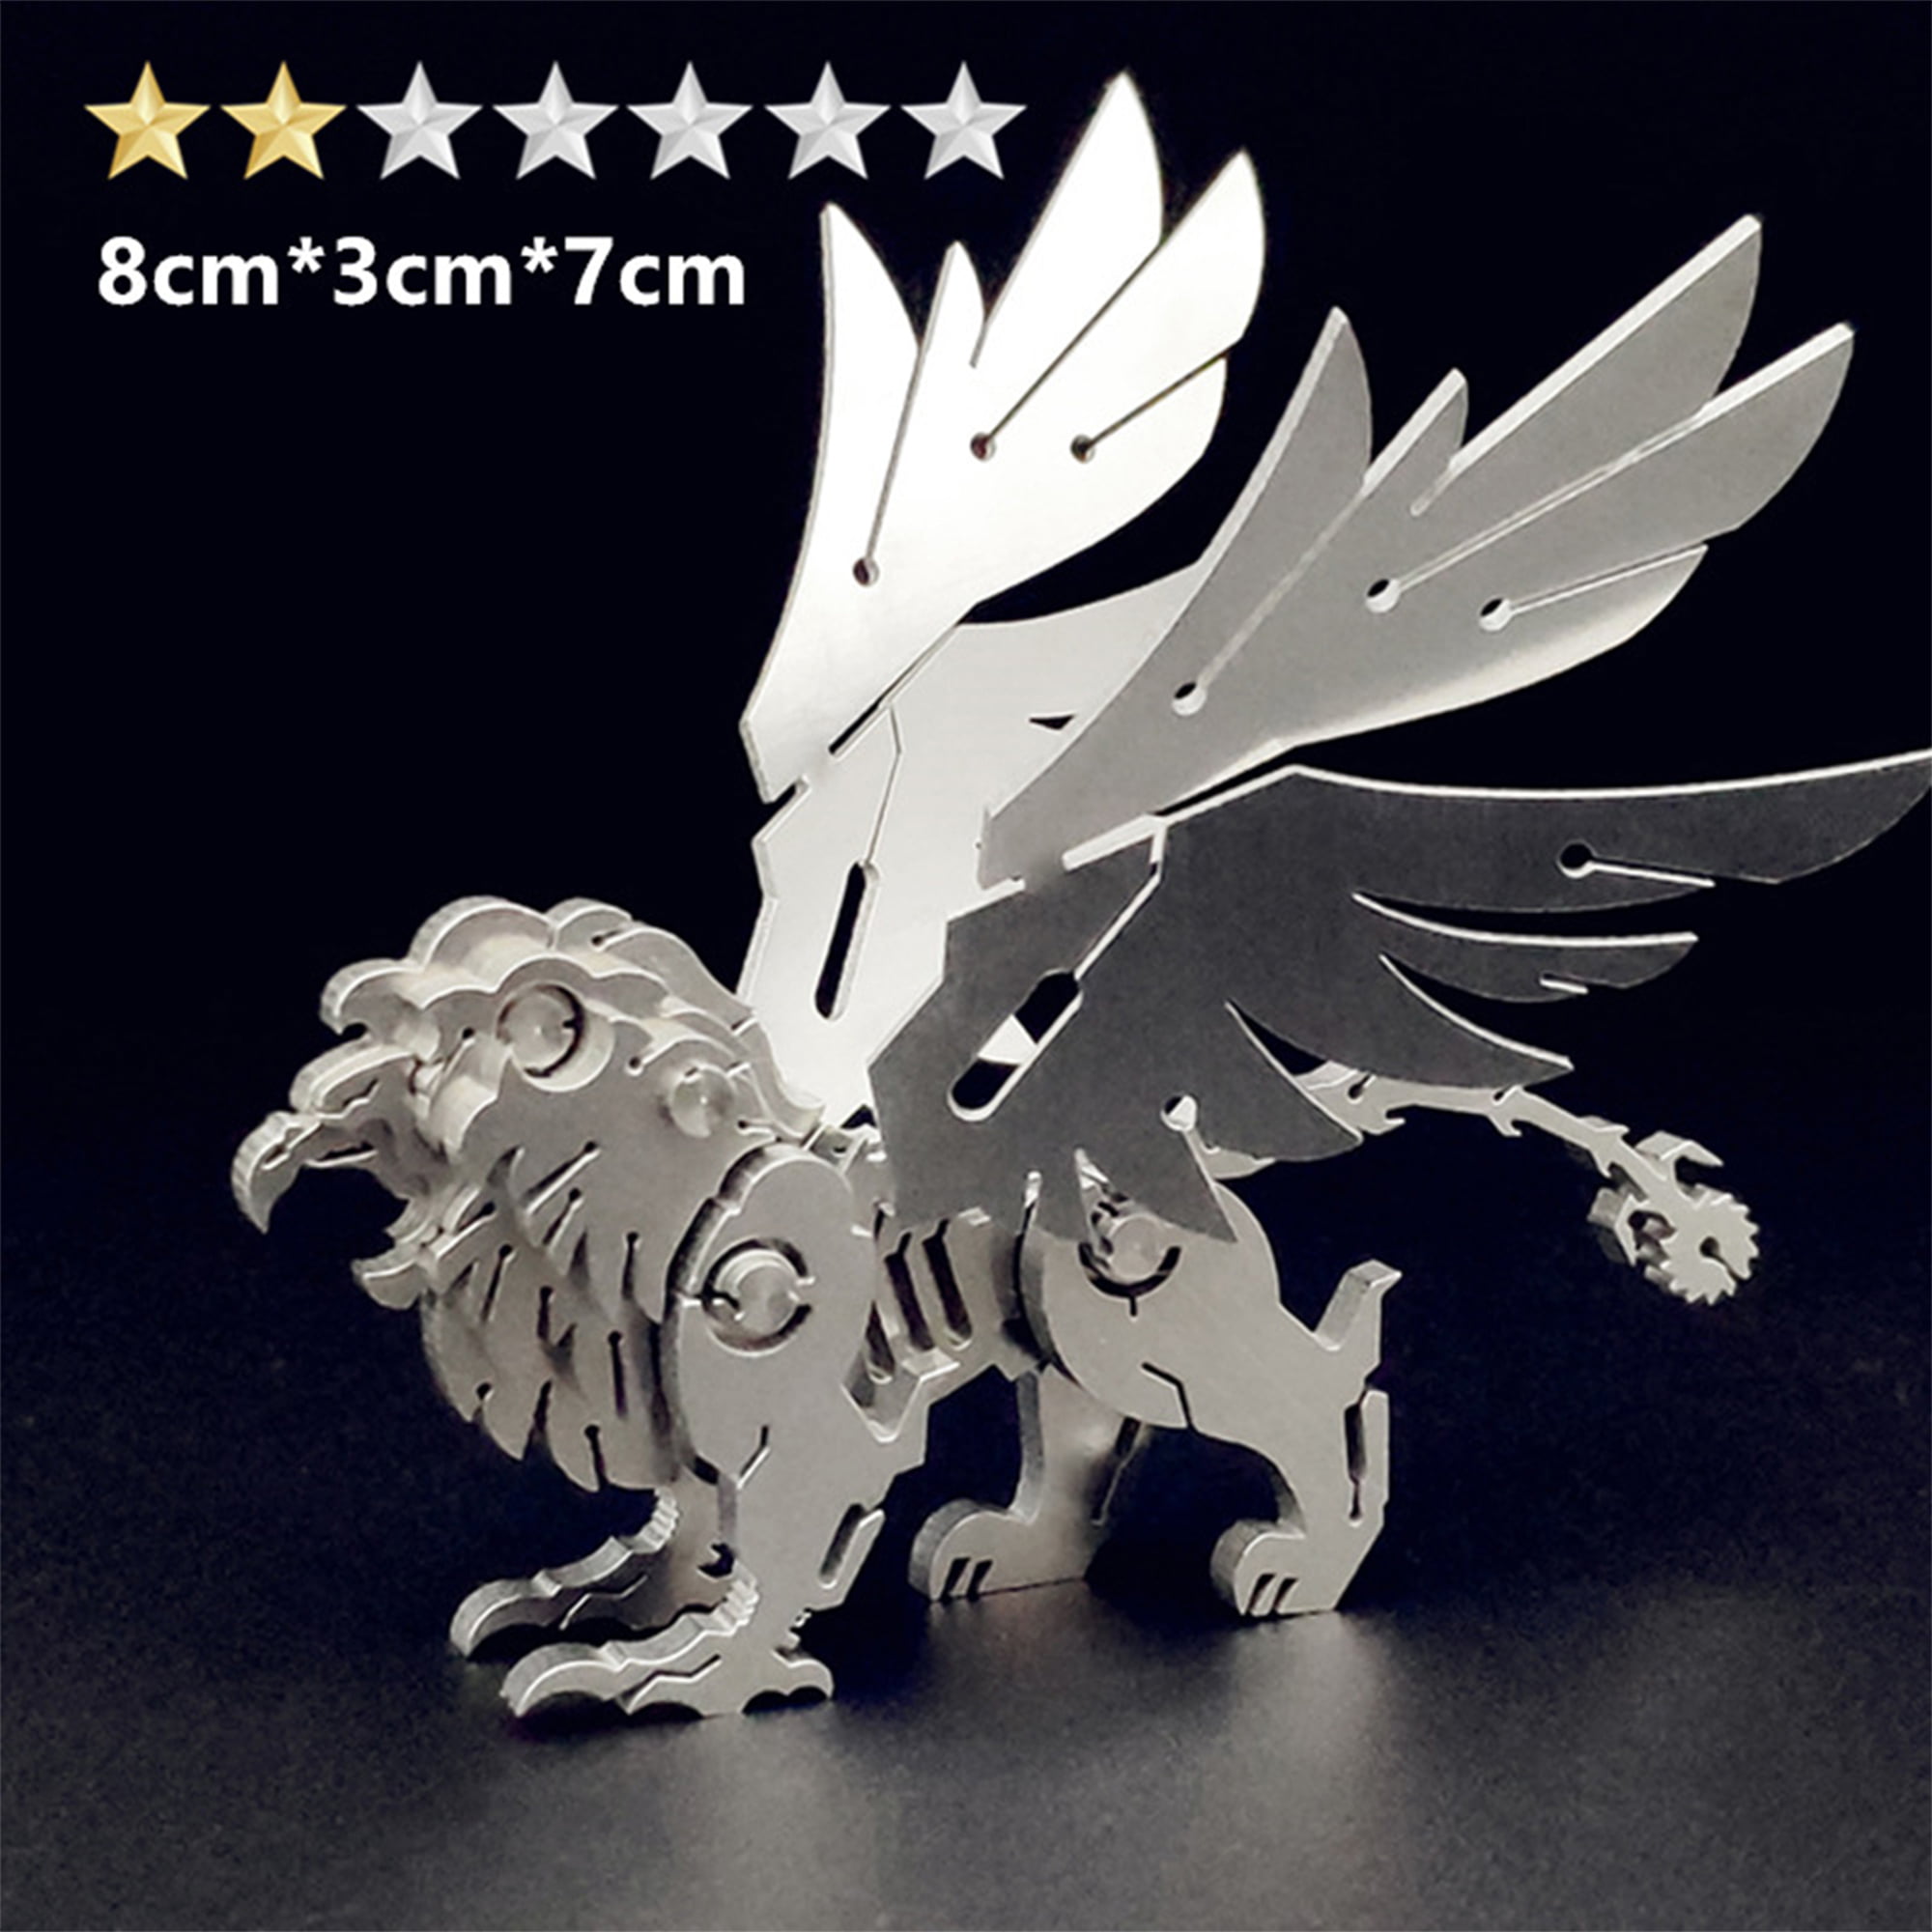 3D Metal Puzzle Stainless Steel DIY Toys Gifts - Unicorn - Fulgent World